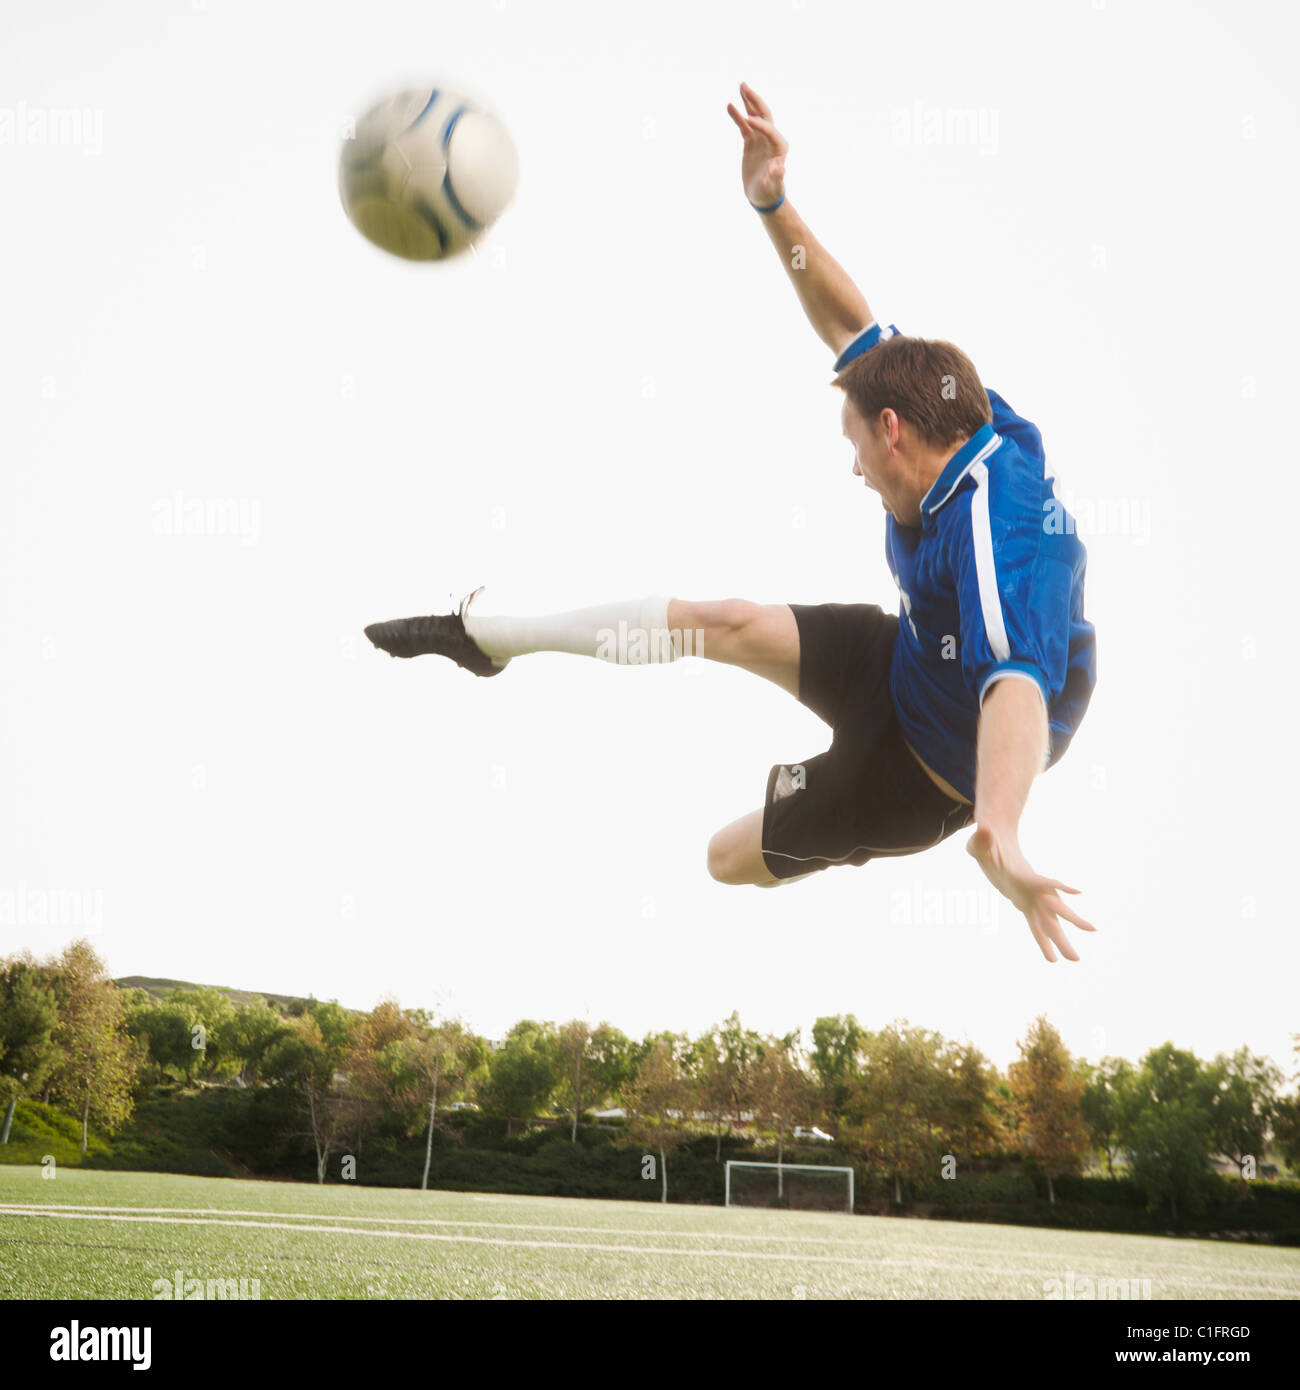 Caucasian soccer player in mid-air kicking soccer ball Stock Photo